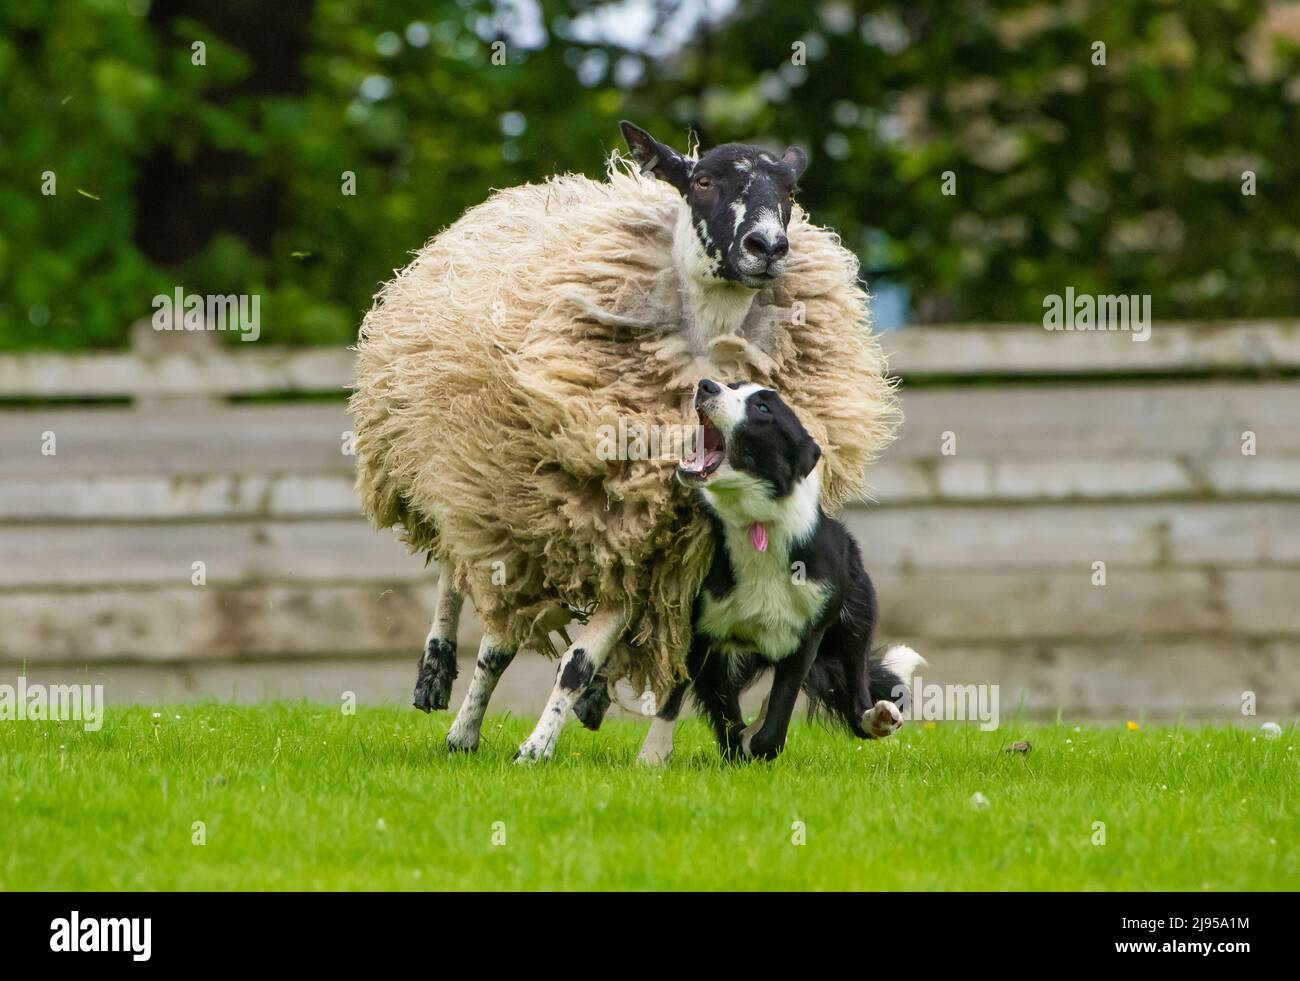 Skipton, North Yorkshire, UK. 20th May, 2022. An overenthusiastic sheepdog at the Spring Sale of Sheepdogs held at Skipton, North Yorkshire, UK. No harm came to sheep or dog. Credit: John Eveson/Alamy Live News Stock Photo